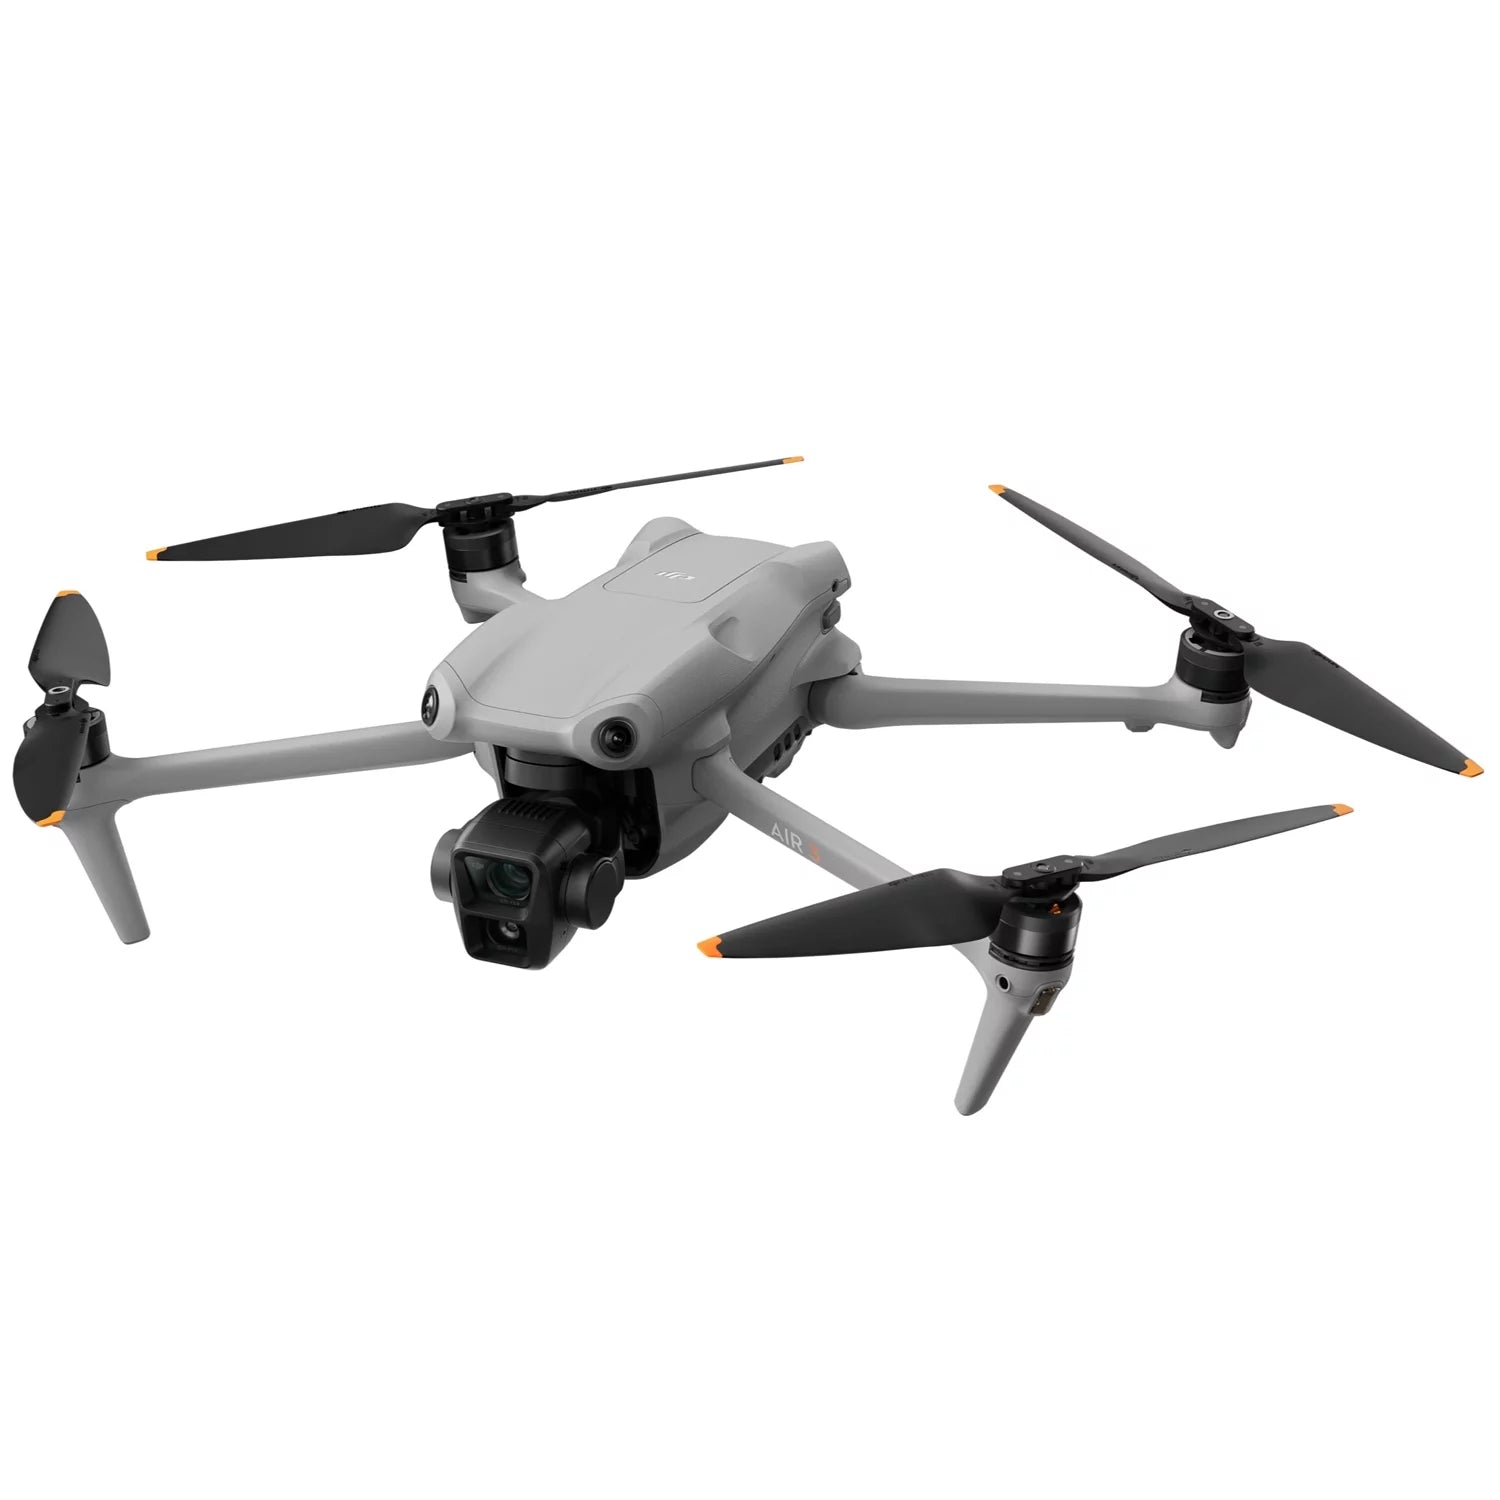 Air 3 Fly More Combo with Dual-Camera Drone, RC 2 Remote Control, and Batteries